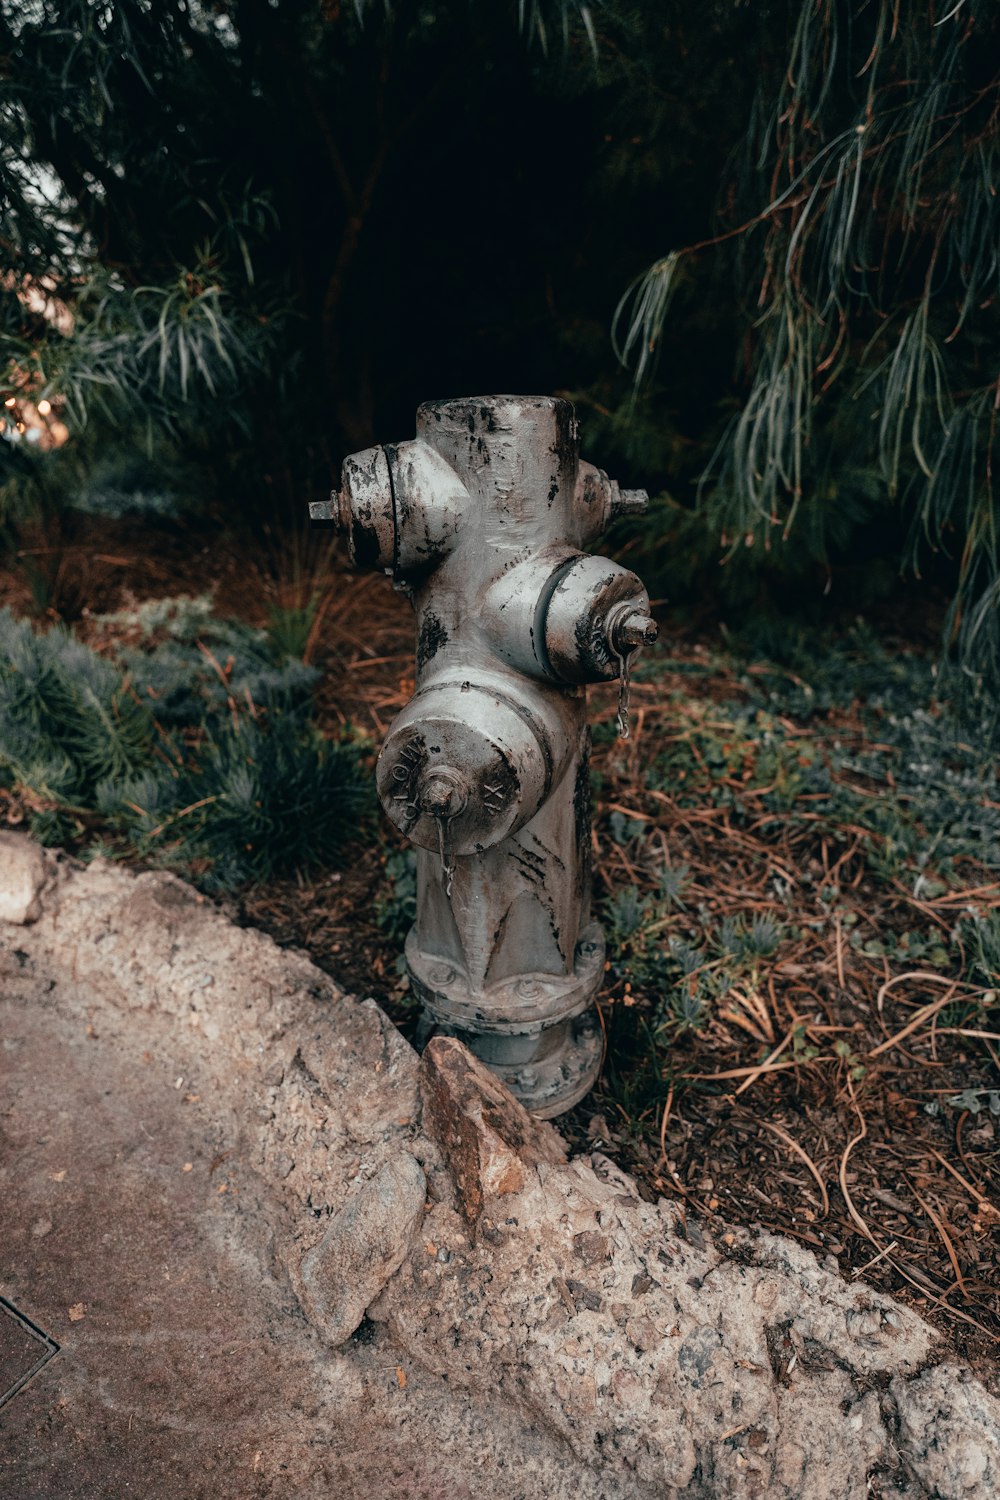 a fire hydrant on the ground